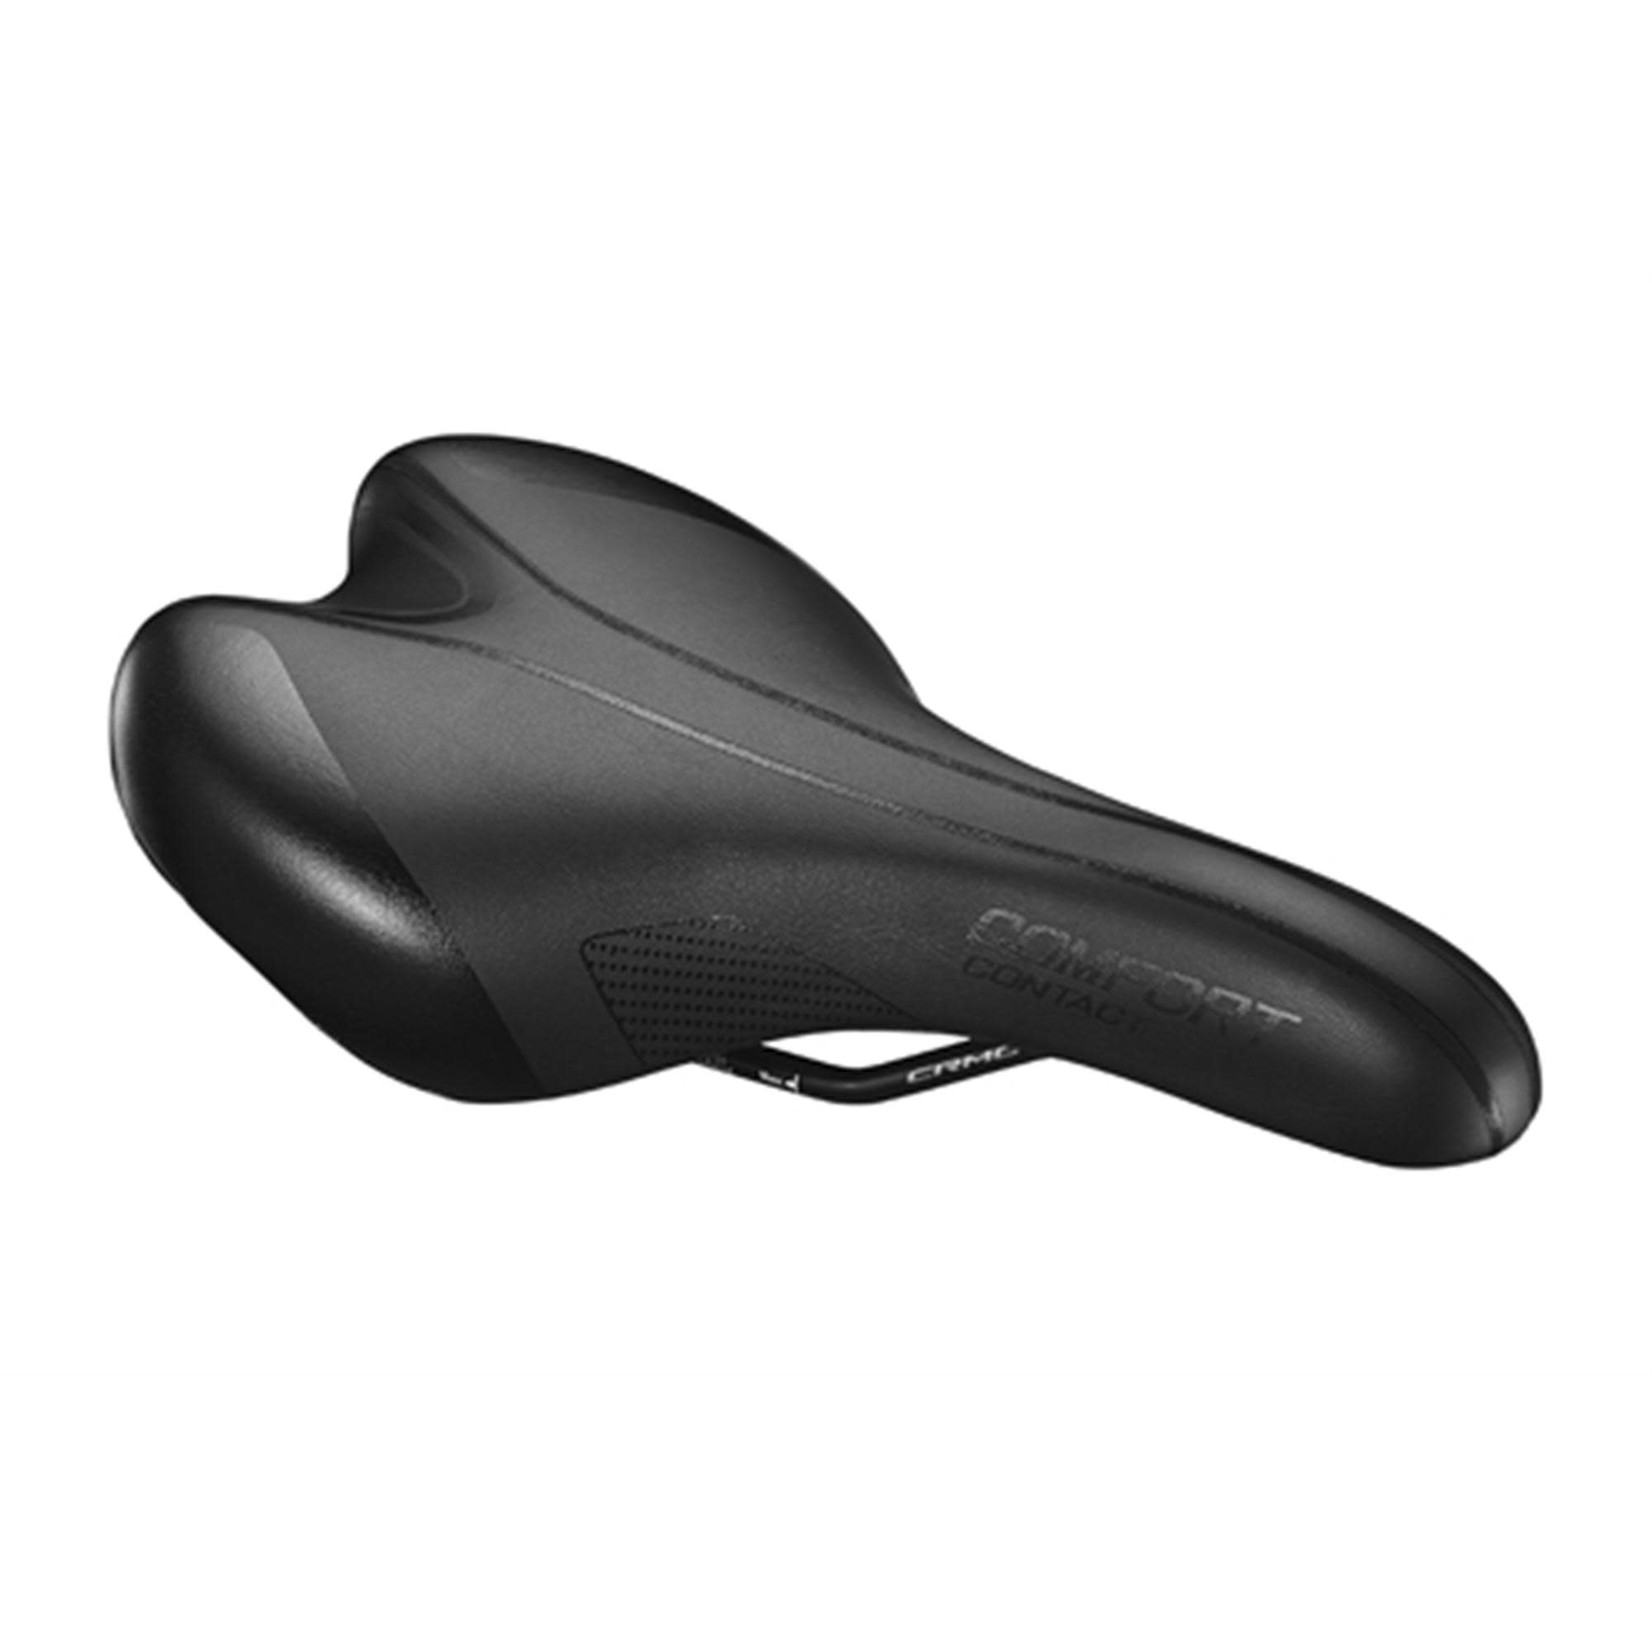 Giant GNT Contact Comfort Saddle Black